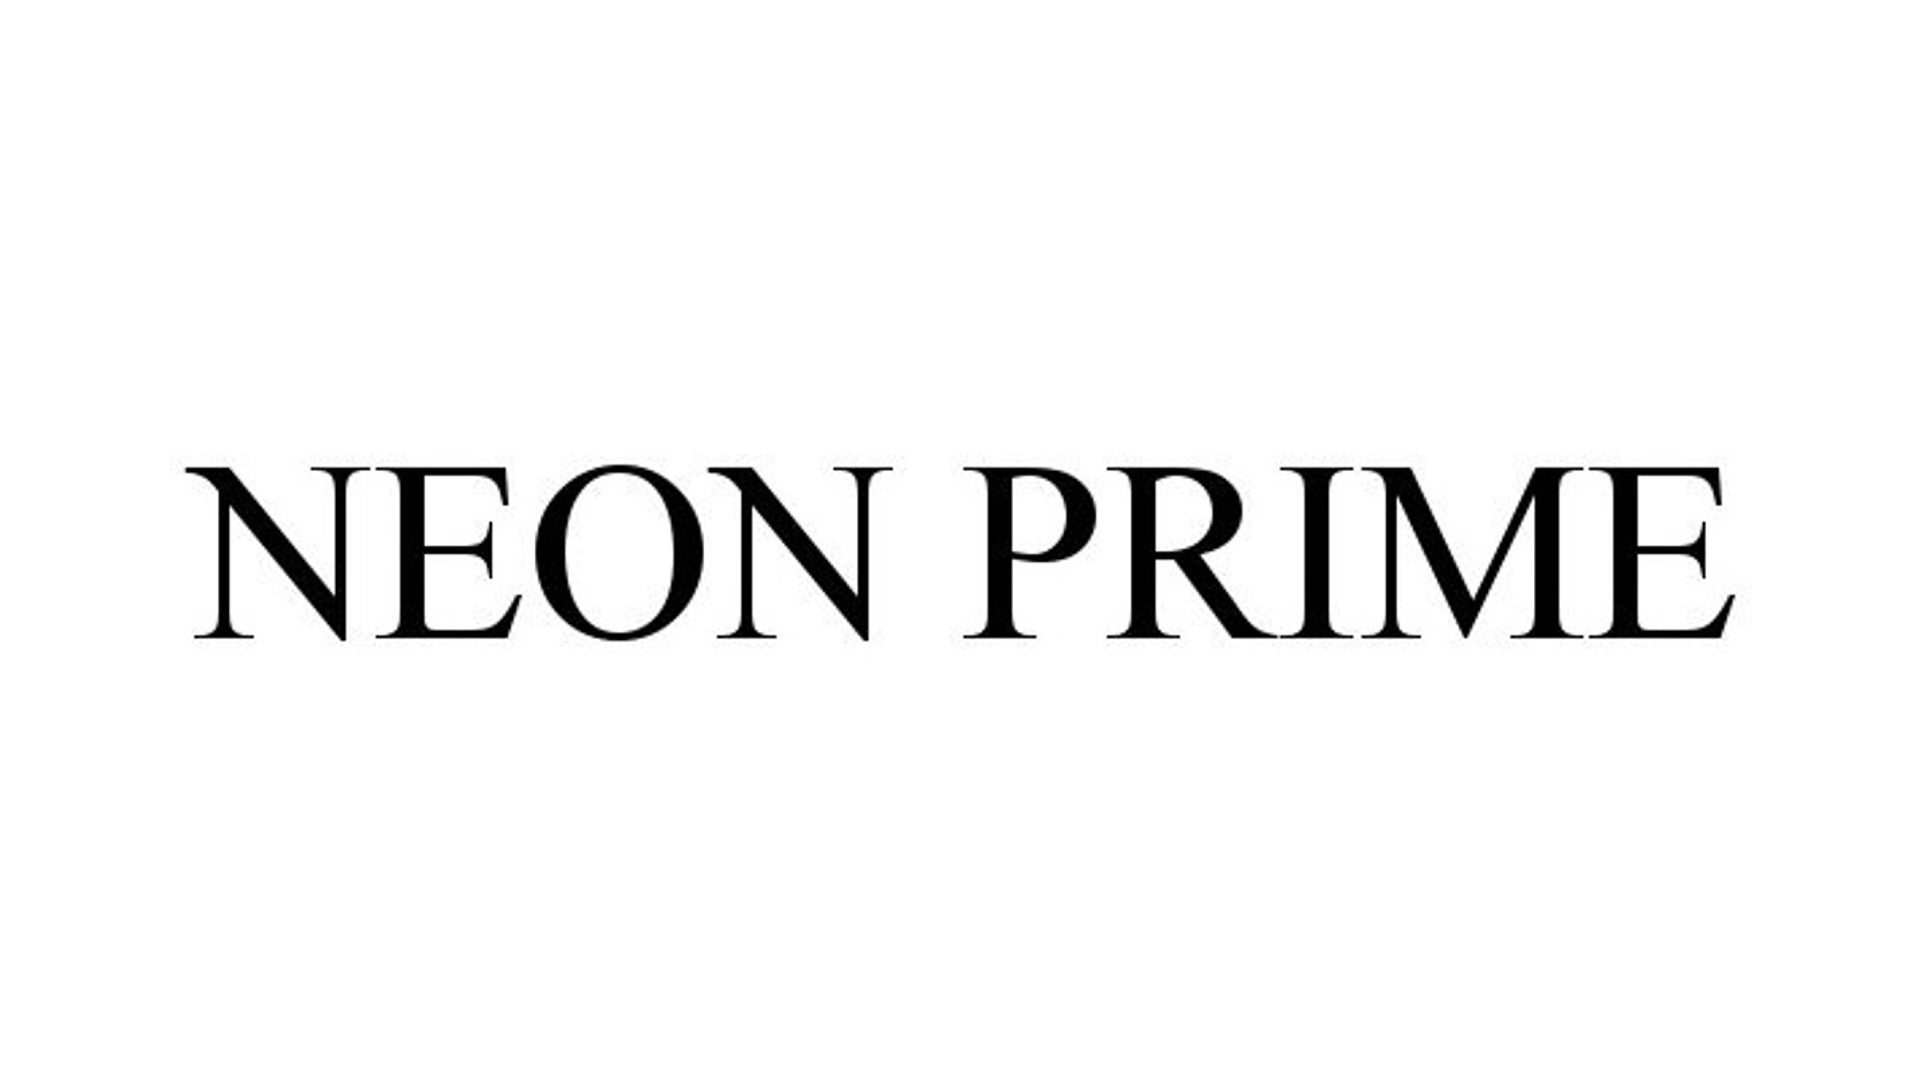 Neon Prime is potentially a game that Valve are trying to trademark as of October 2022.